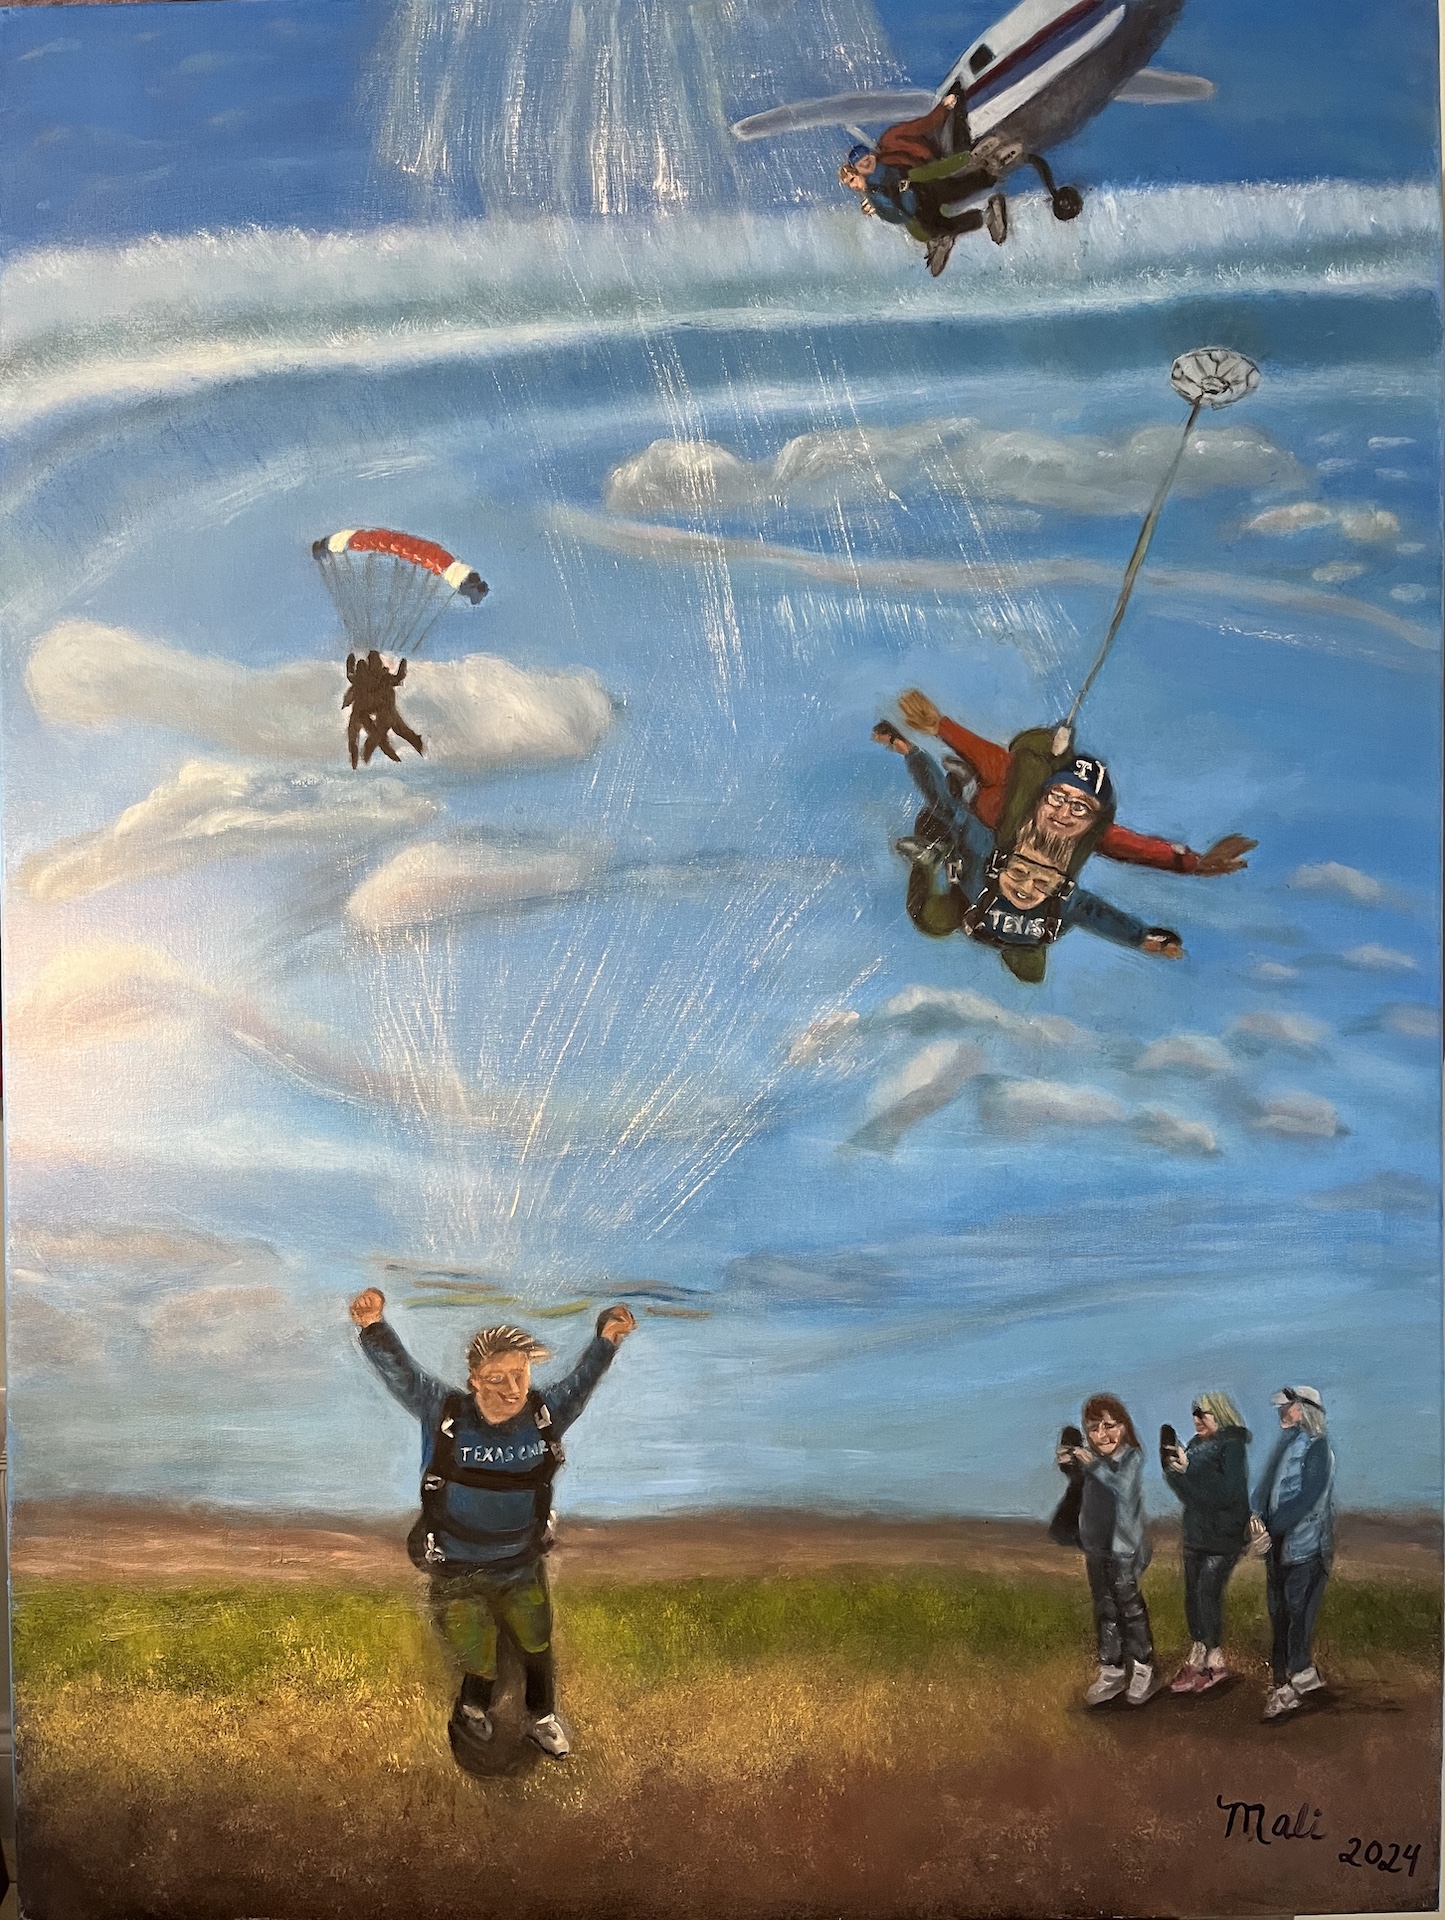 The skydiving trip that inspired this Brushes with Cancer piece